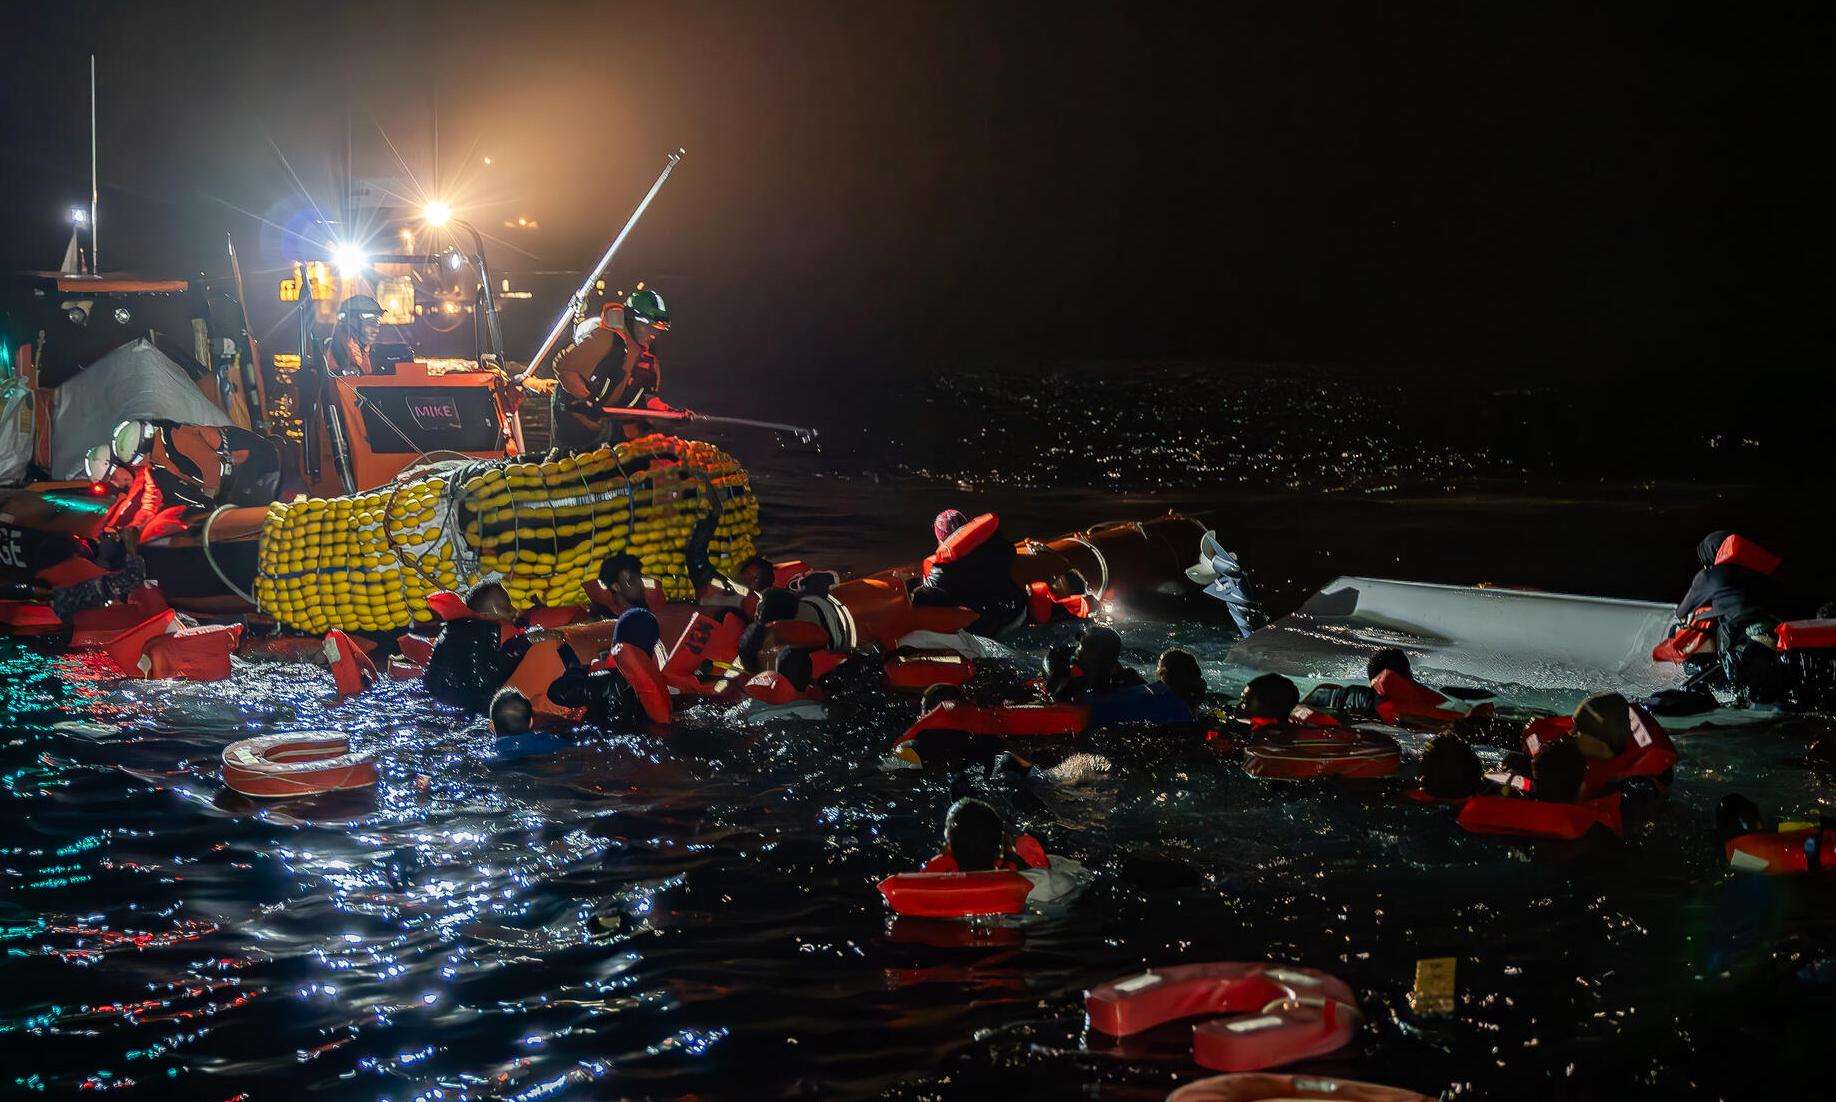 MSF search and rescue teams rescue migrants from a capsized boat in the Central Mediterranean.